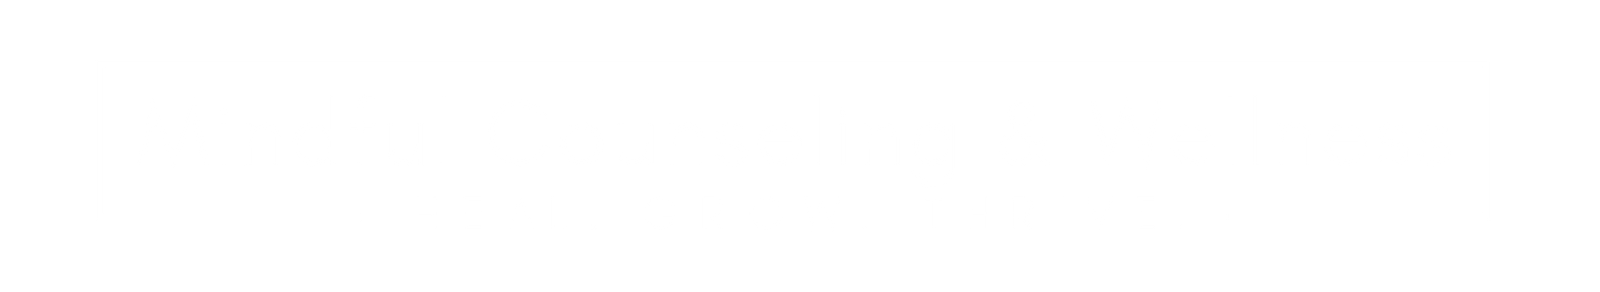 Mindful counseling and wellness denton tx logo white